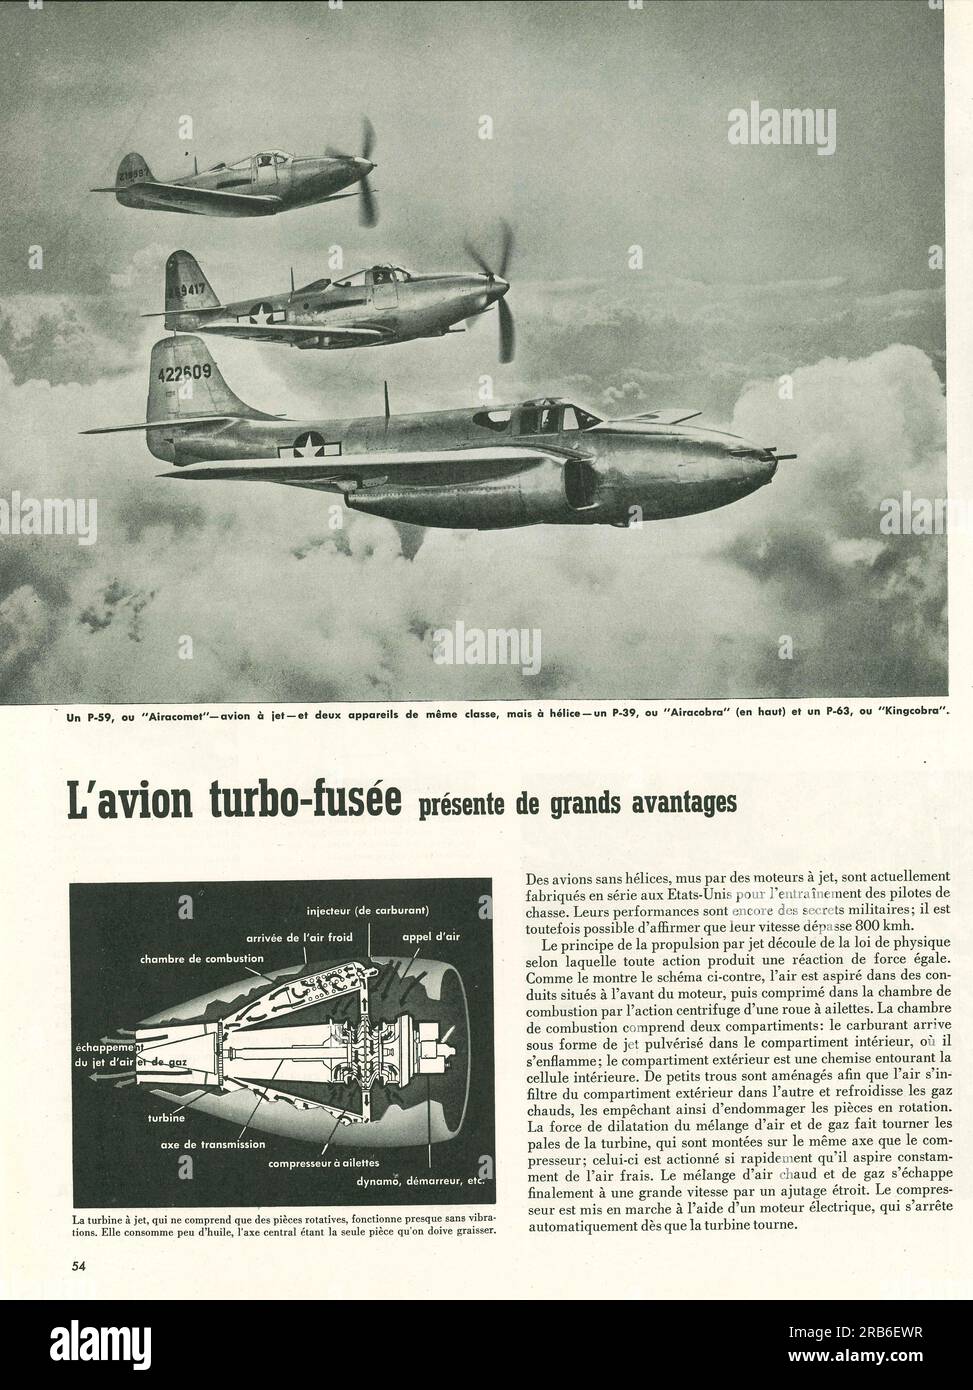 Turbo rocket planes. The article on Bell P-59, P-39, P-63  Airacomet American jets designed by Bell Aircraft during World War II. French magazine 1946 Stock Photo